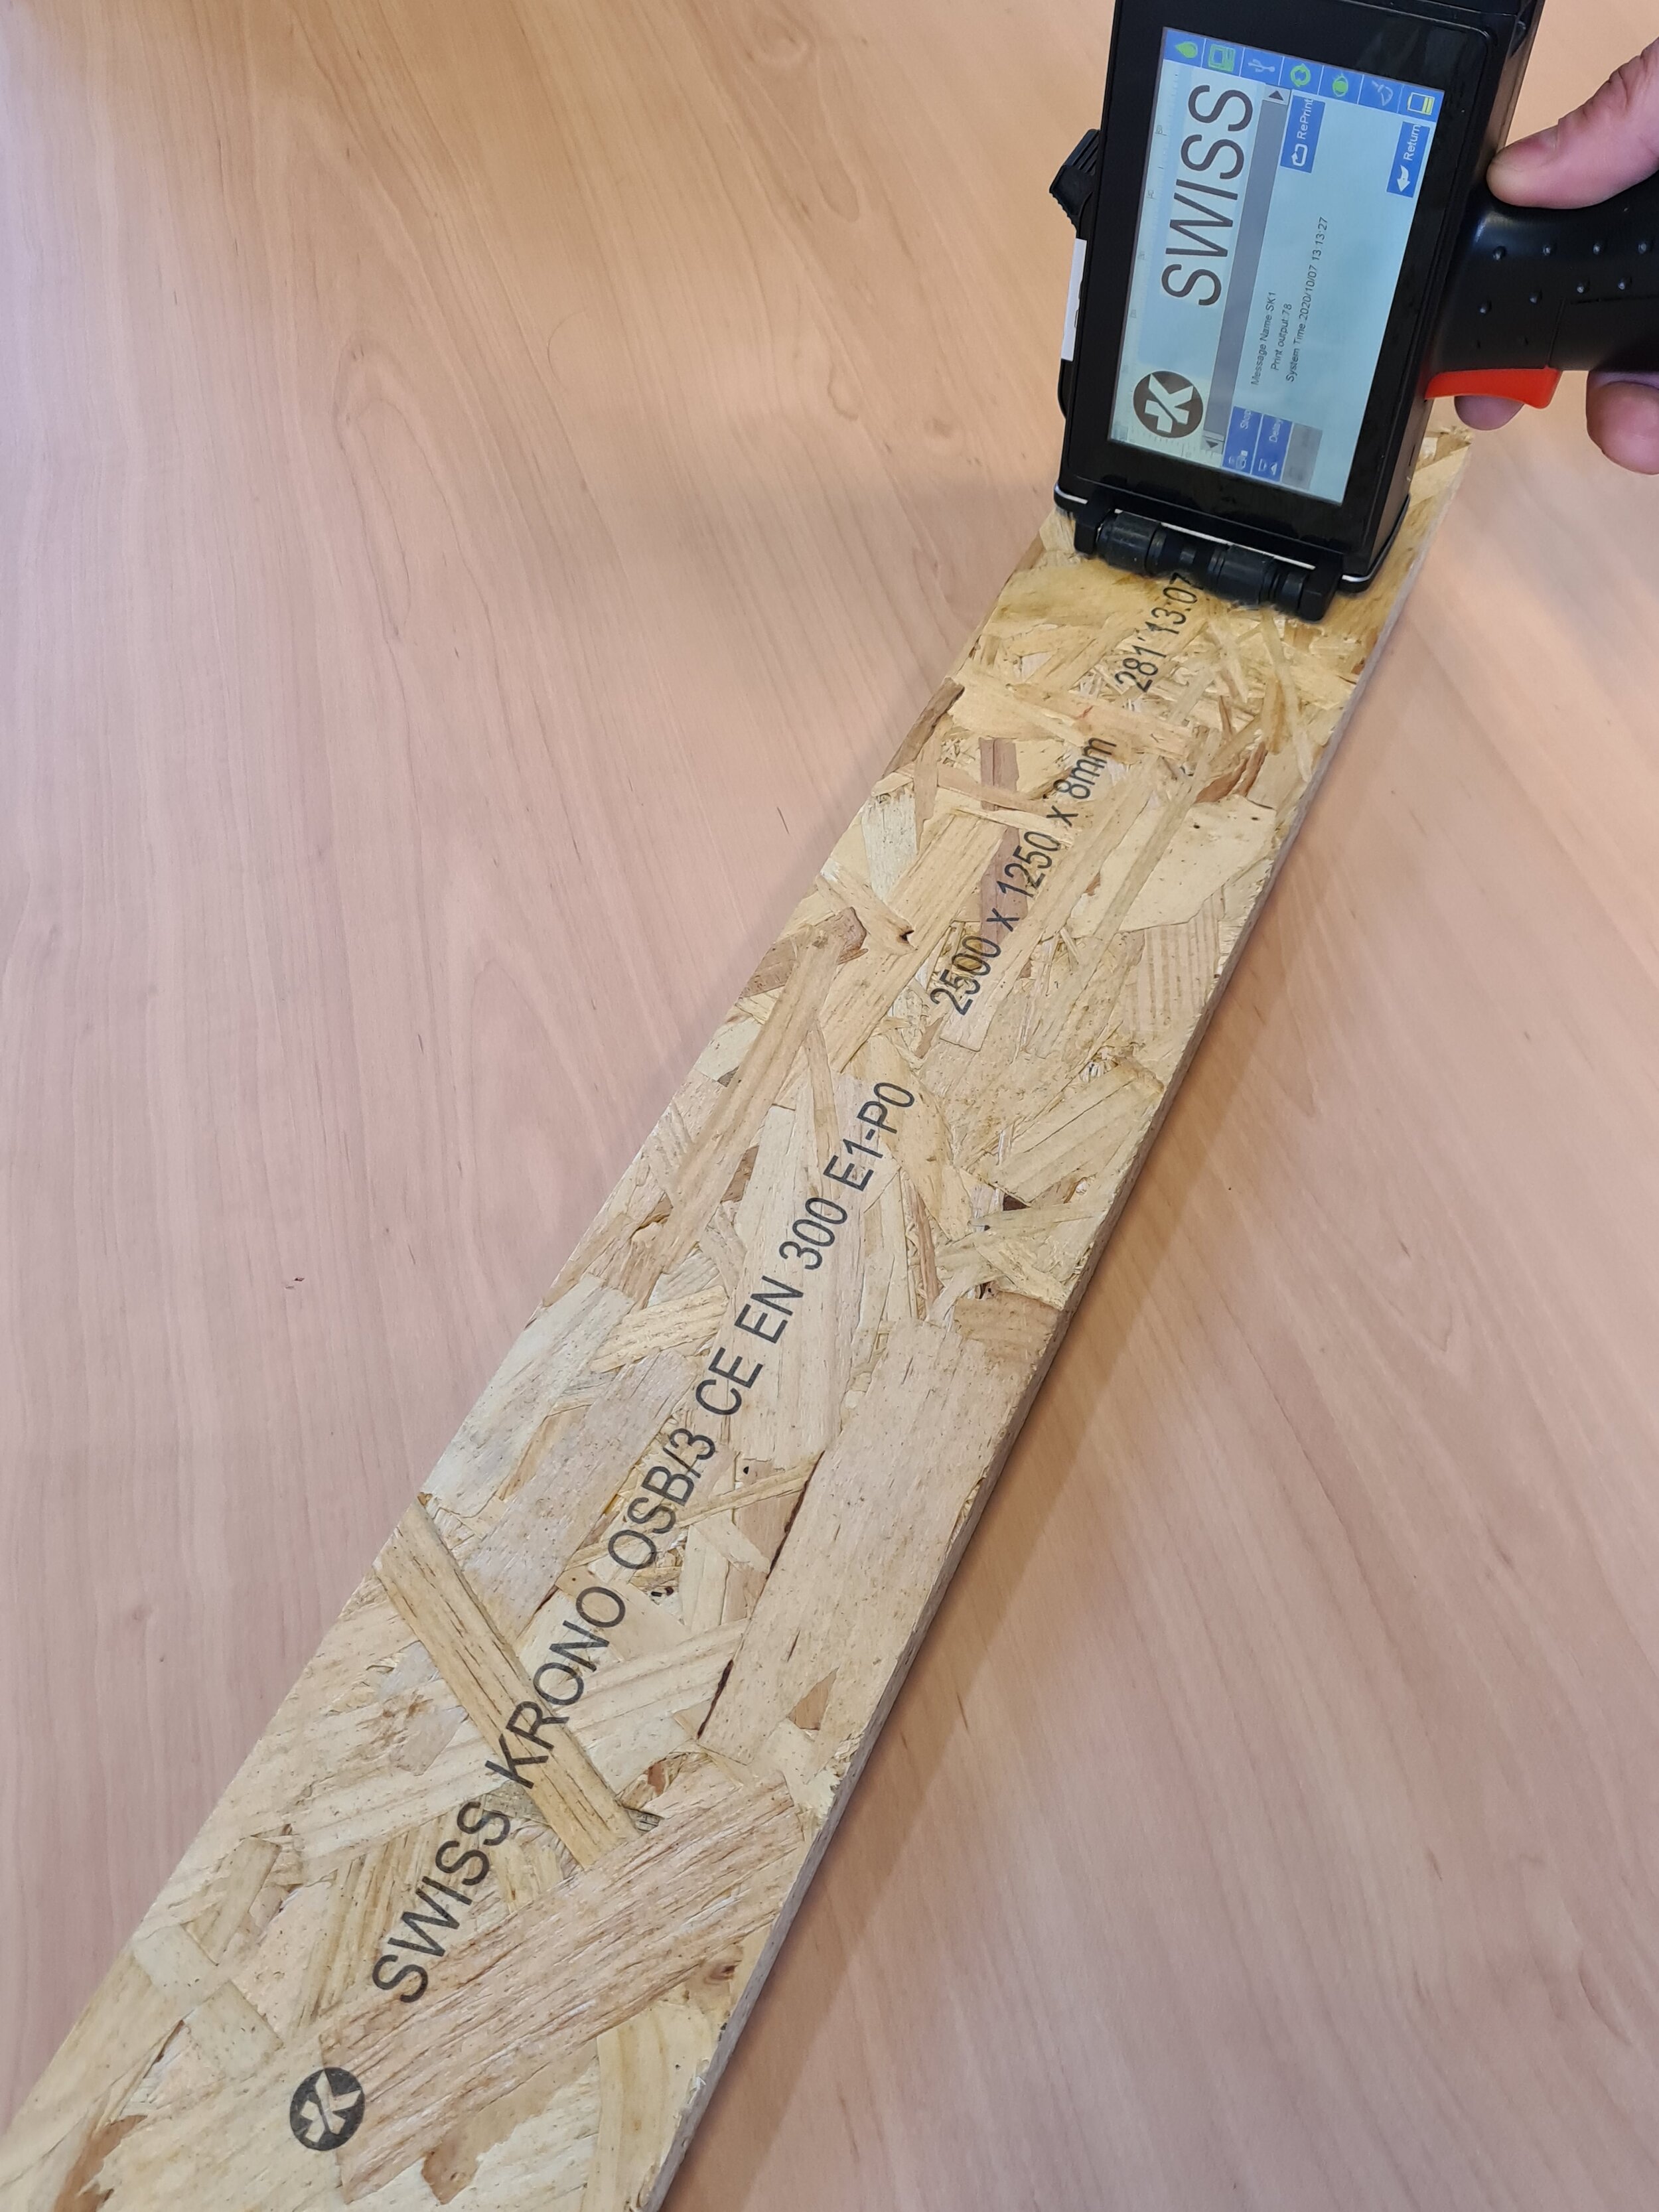 Using the Sojet D1 ‘Dragon’ handjet to print high res logo and information on OSB